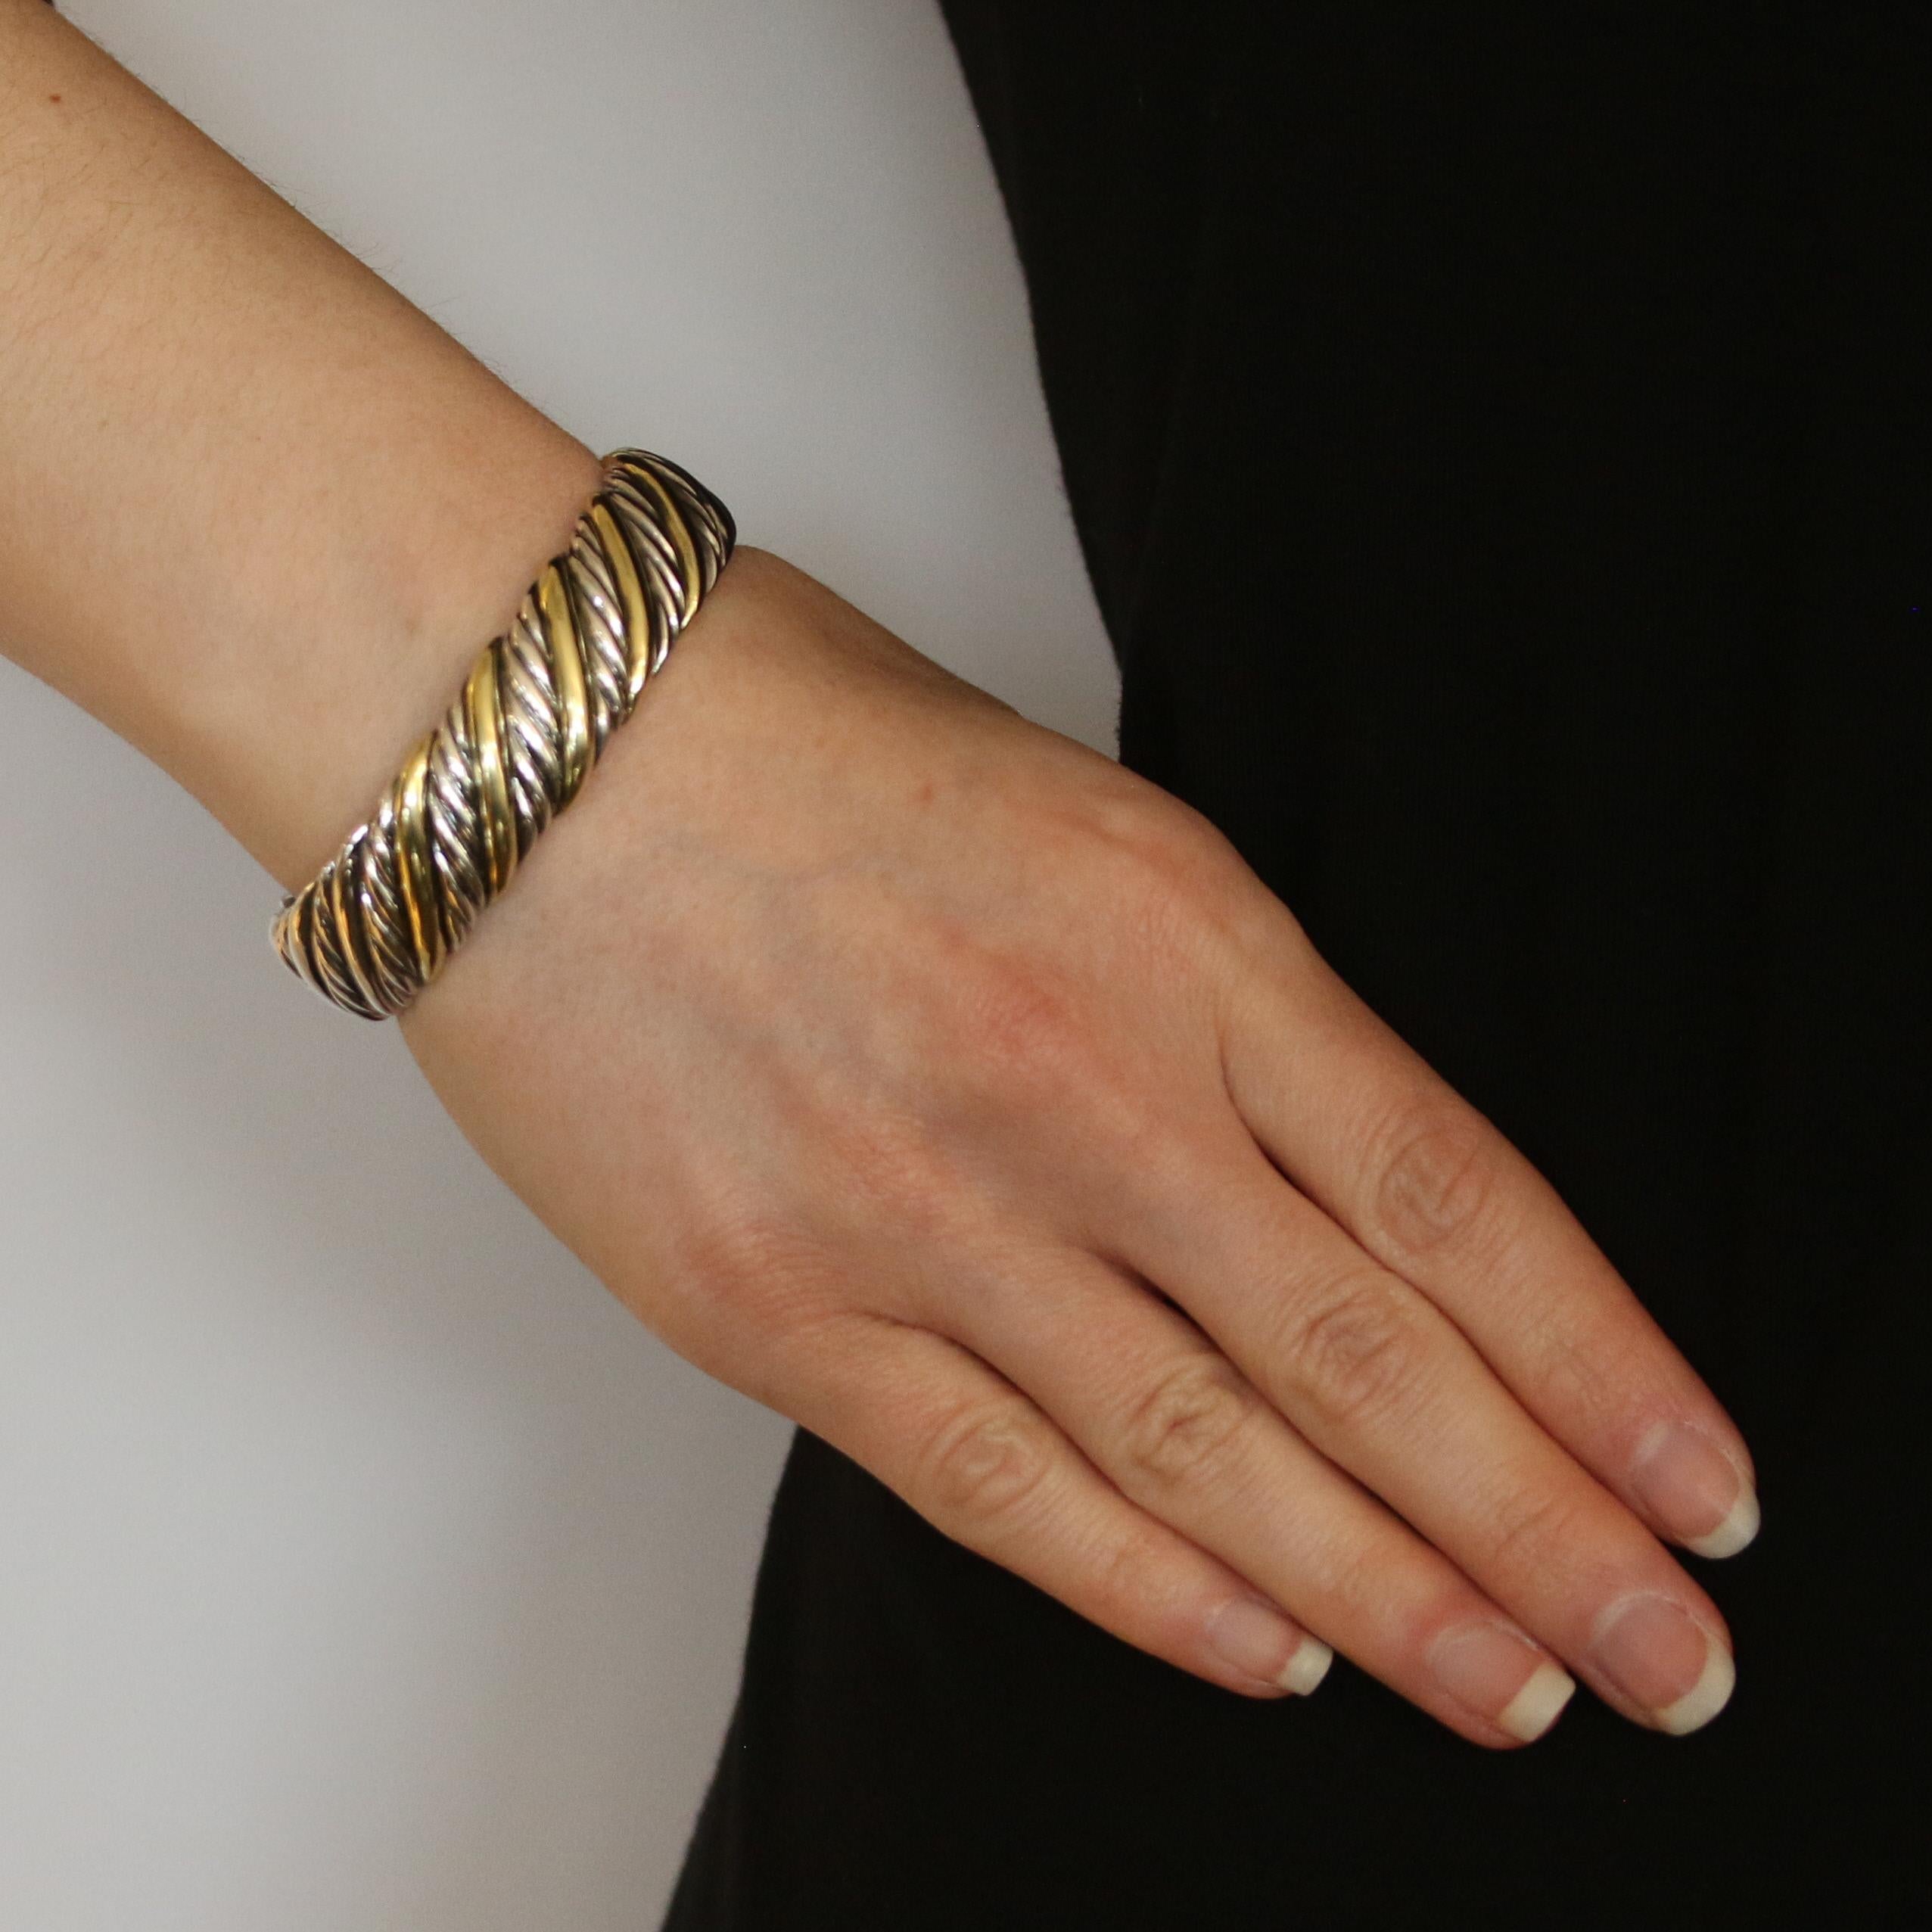 Brand: David Yurman
 Collection: Cable 
 
 Metal Content: Sterling Silver & 18k Yellow Gold
 
 Bracelet Style: Cuff
 Closure Type: N/A (slides over wrist)
 
 Measurements: 
 Inner circumference: 6 1/4